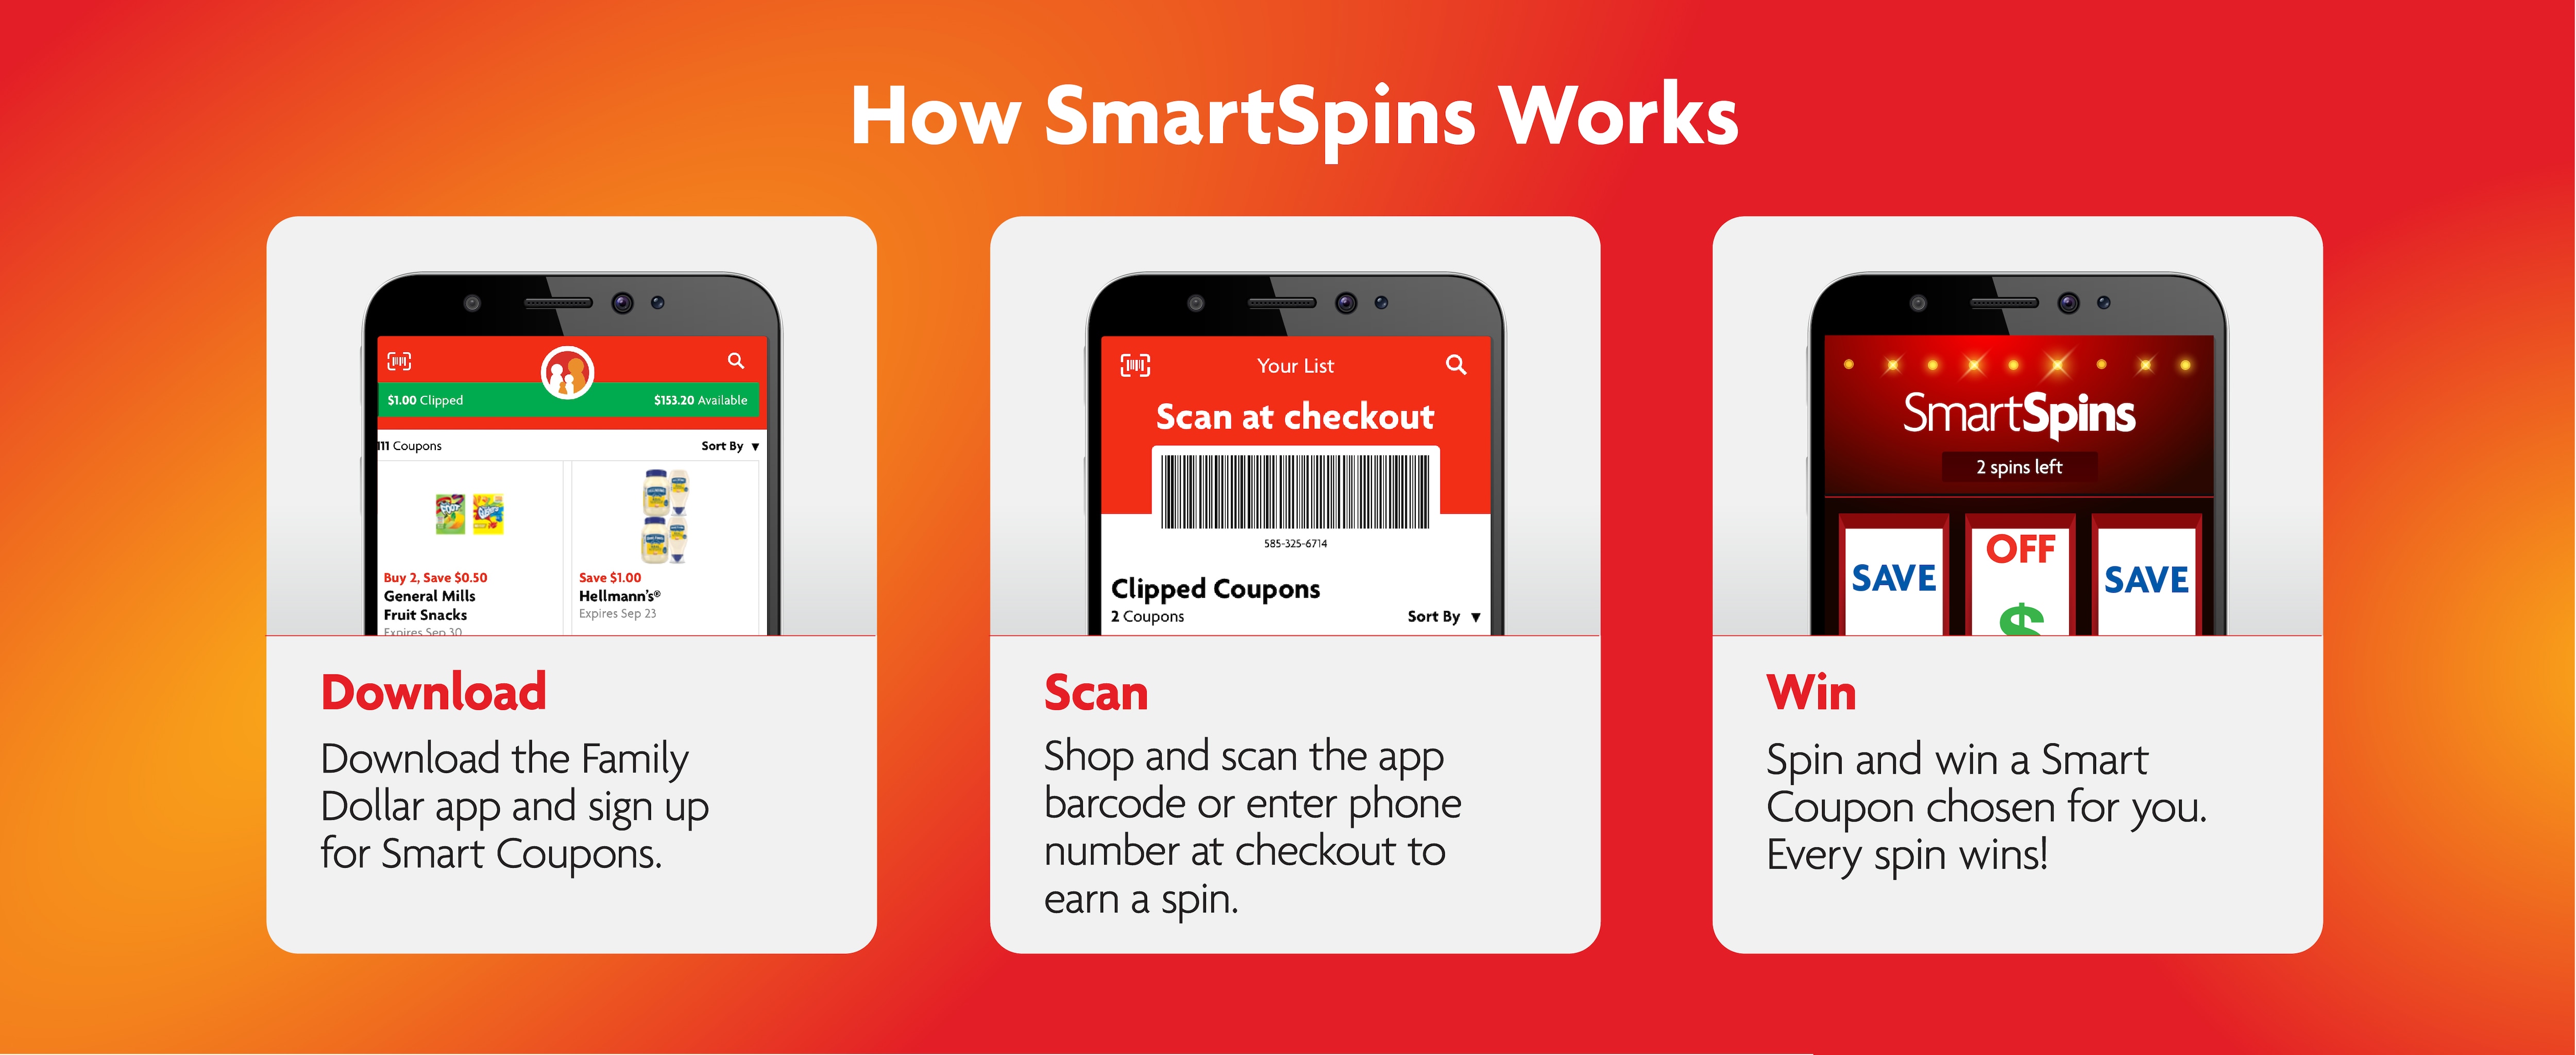 Family Dollar Smartspins In Smart Coupons App